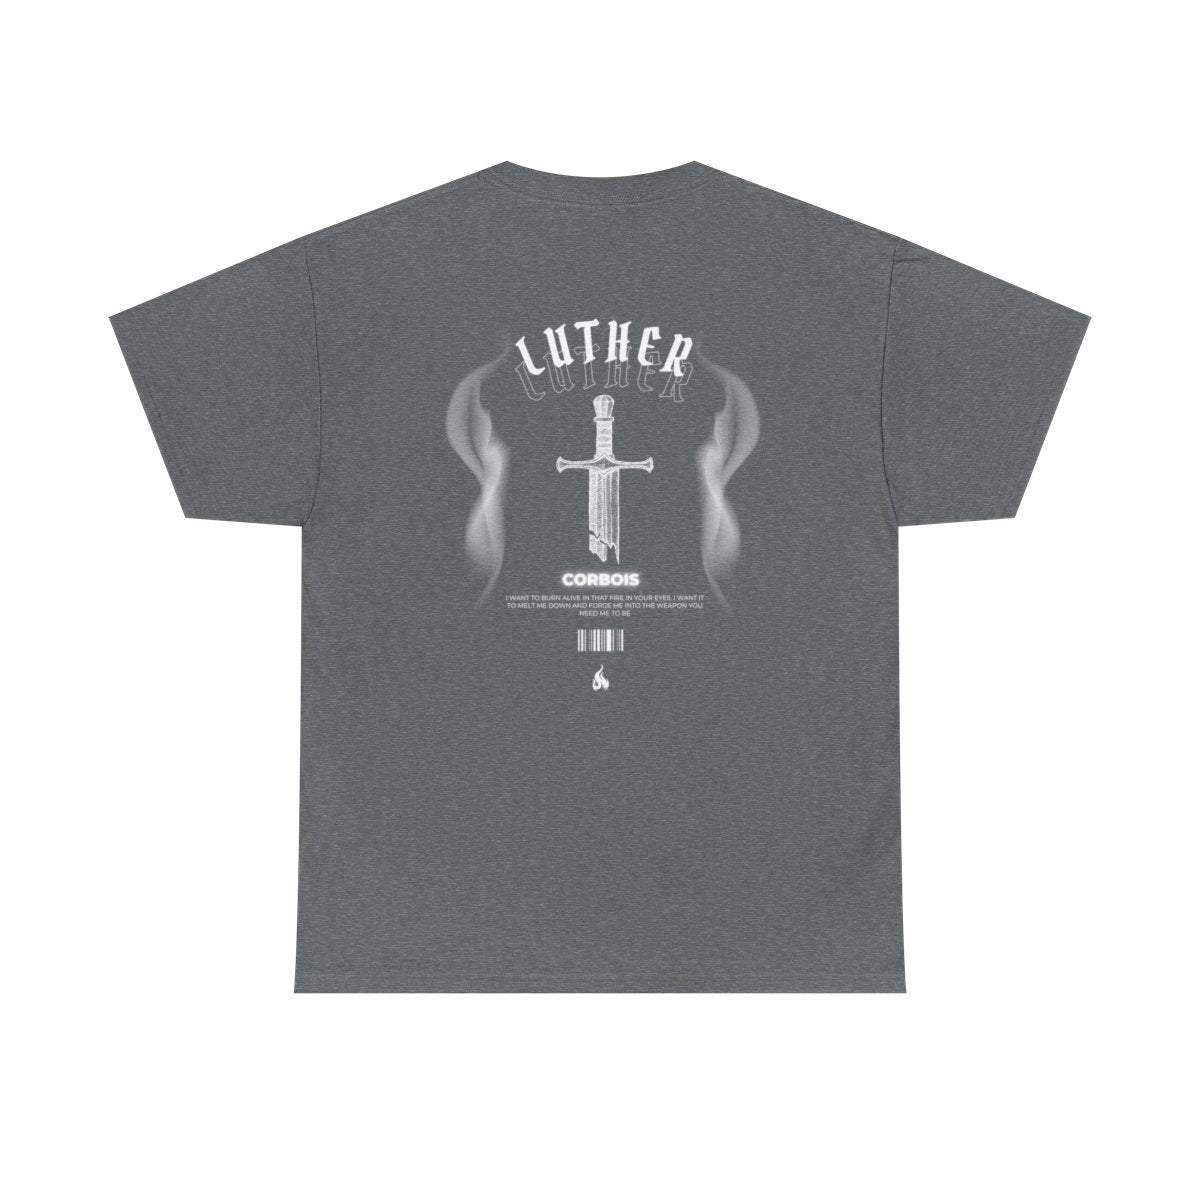 Luther Corbois T-Shirt